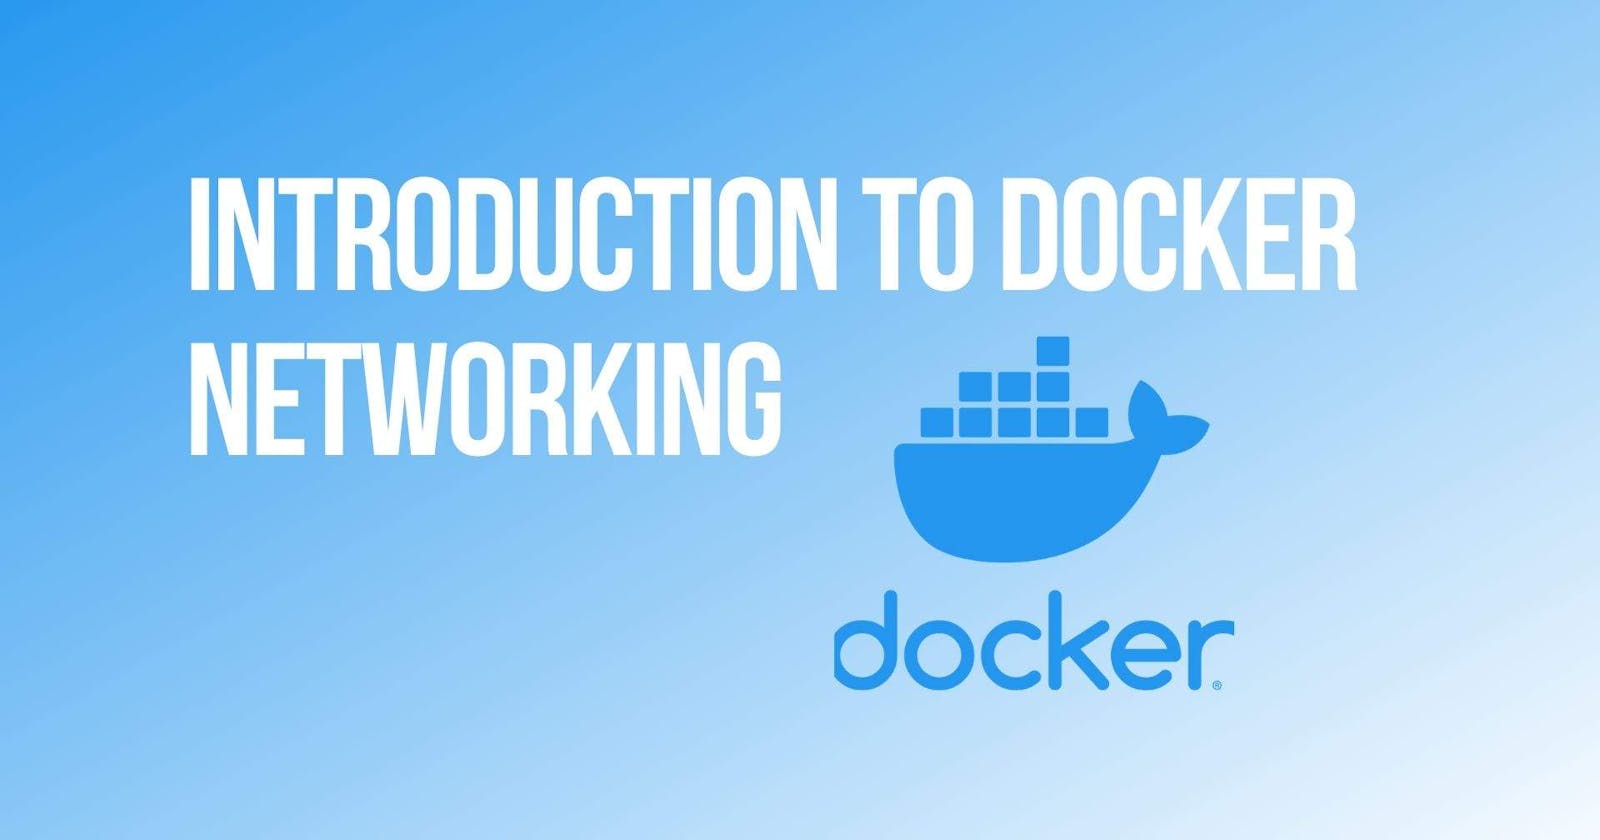 Networking with Docker